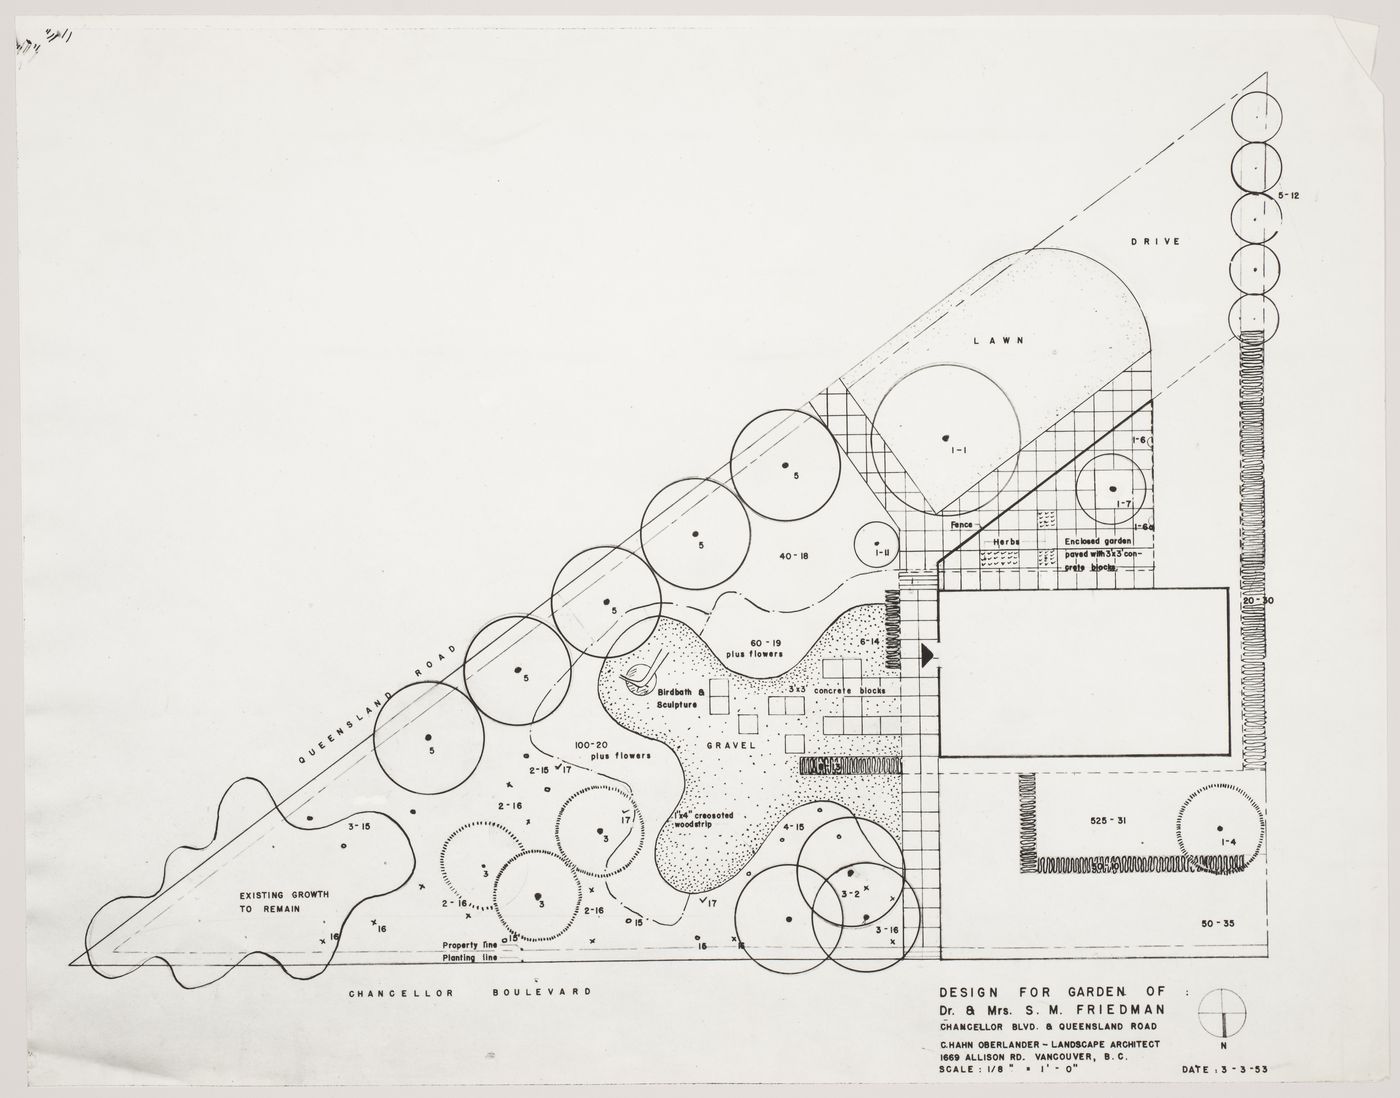 Planting plan, Dr. and Mrs. S. Friedman Garden, Vancouver, British Columbia